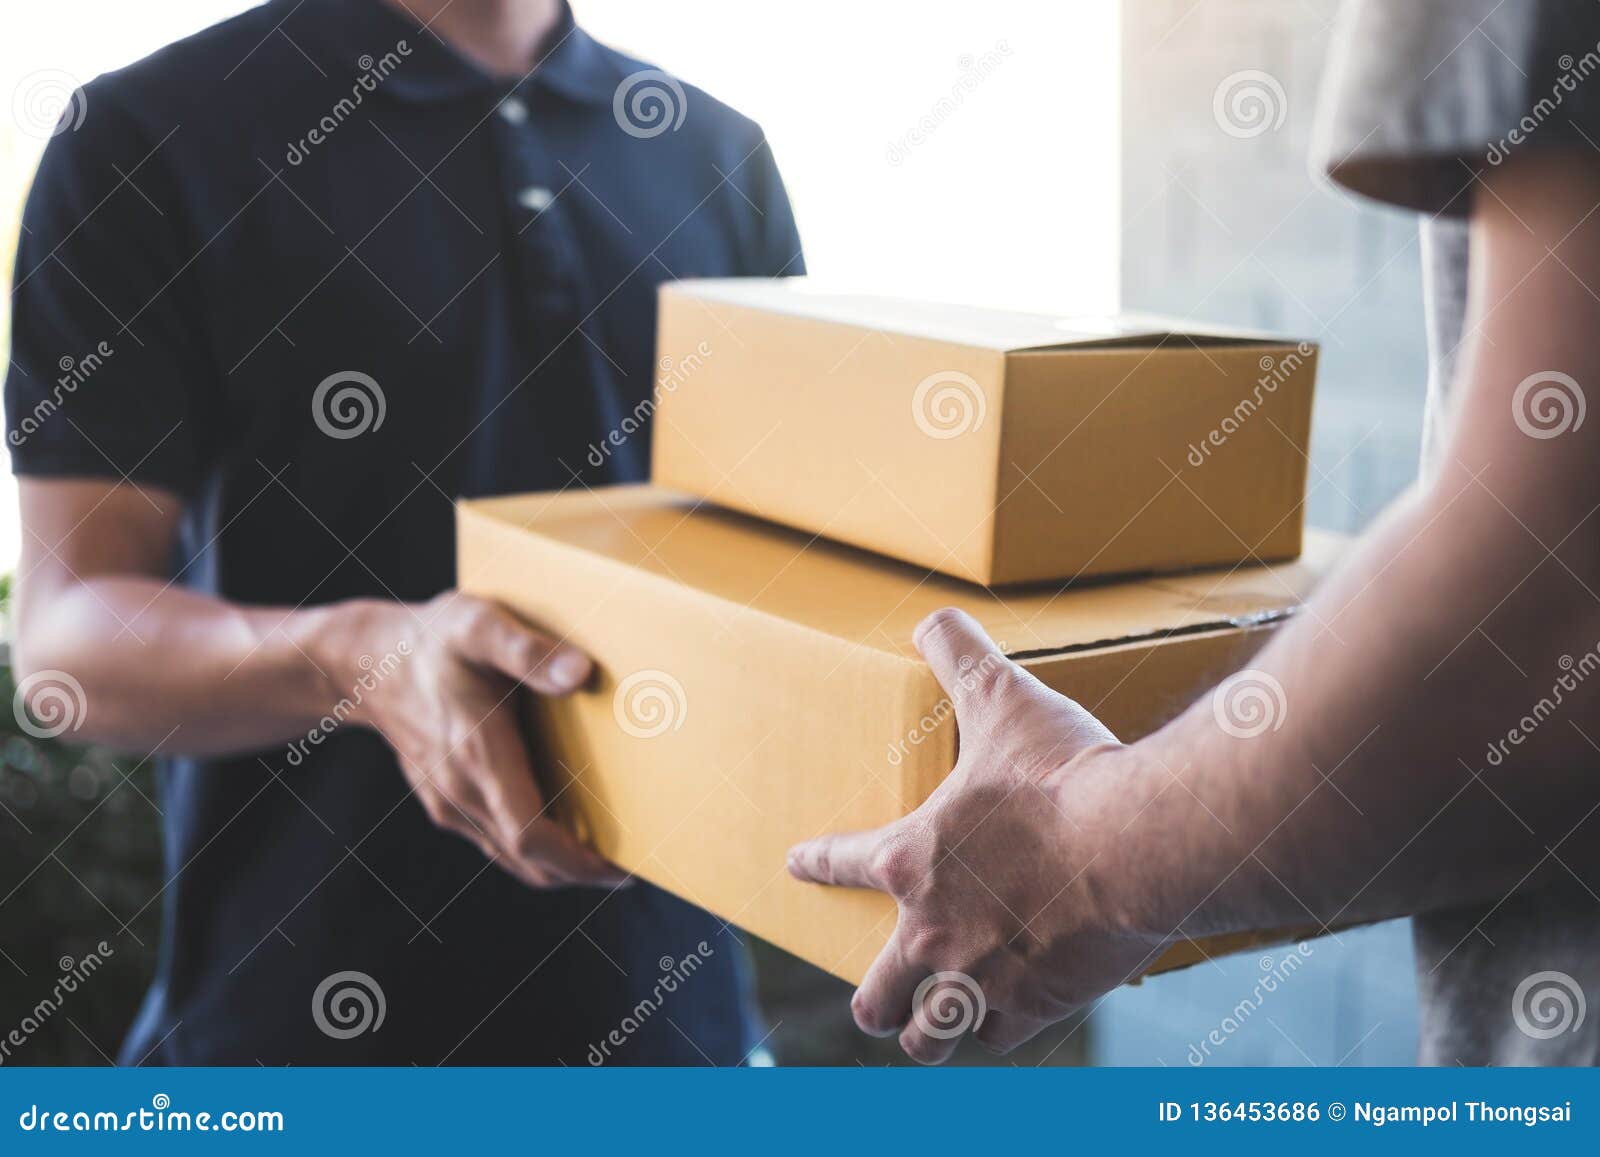 delivery mail man giving parcel box to recipient, young owner accepting of cardboard boxes package from post shipment, home